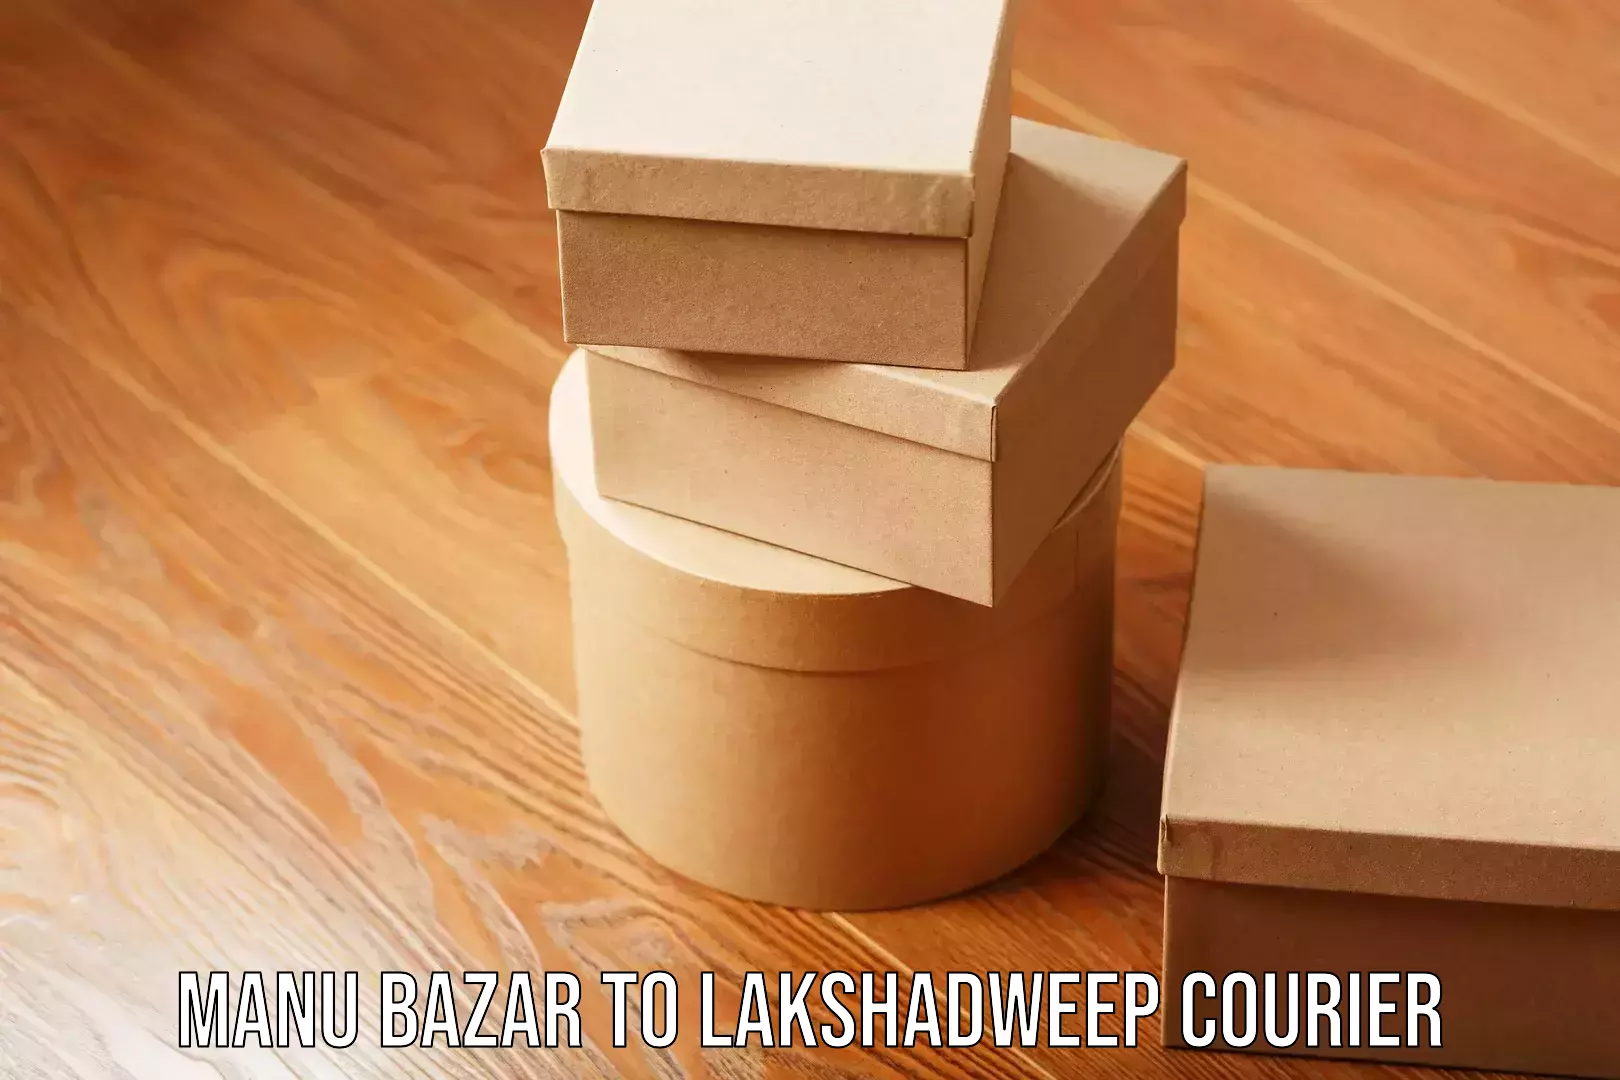 Postal and courier services Manu Bazar to Lakshadweep